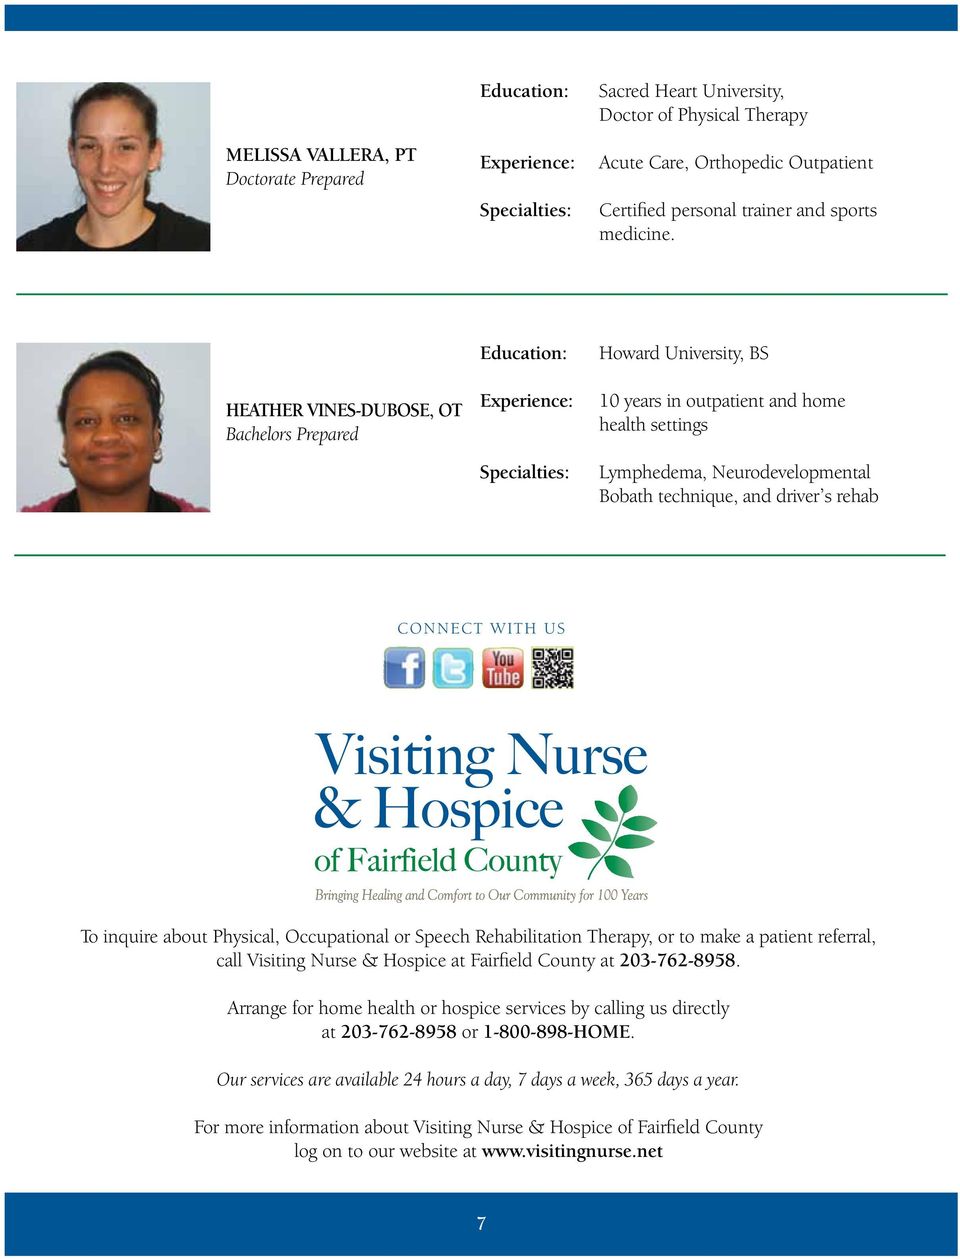 Physical, Occupational or Speech Rehabilitation Therapy, or to make a patient referral, call Visiting Nurse & Hospice at Fairfield County at 203-762-8958.